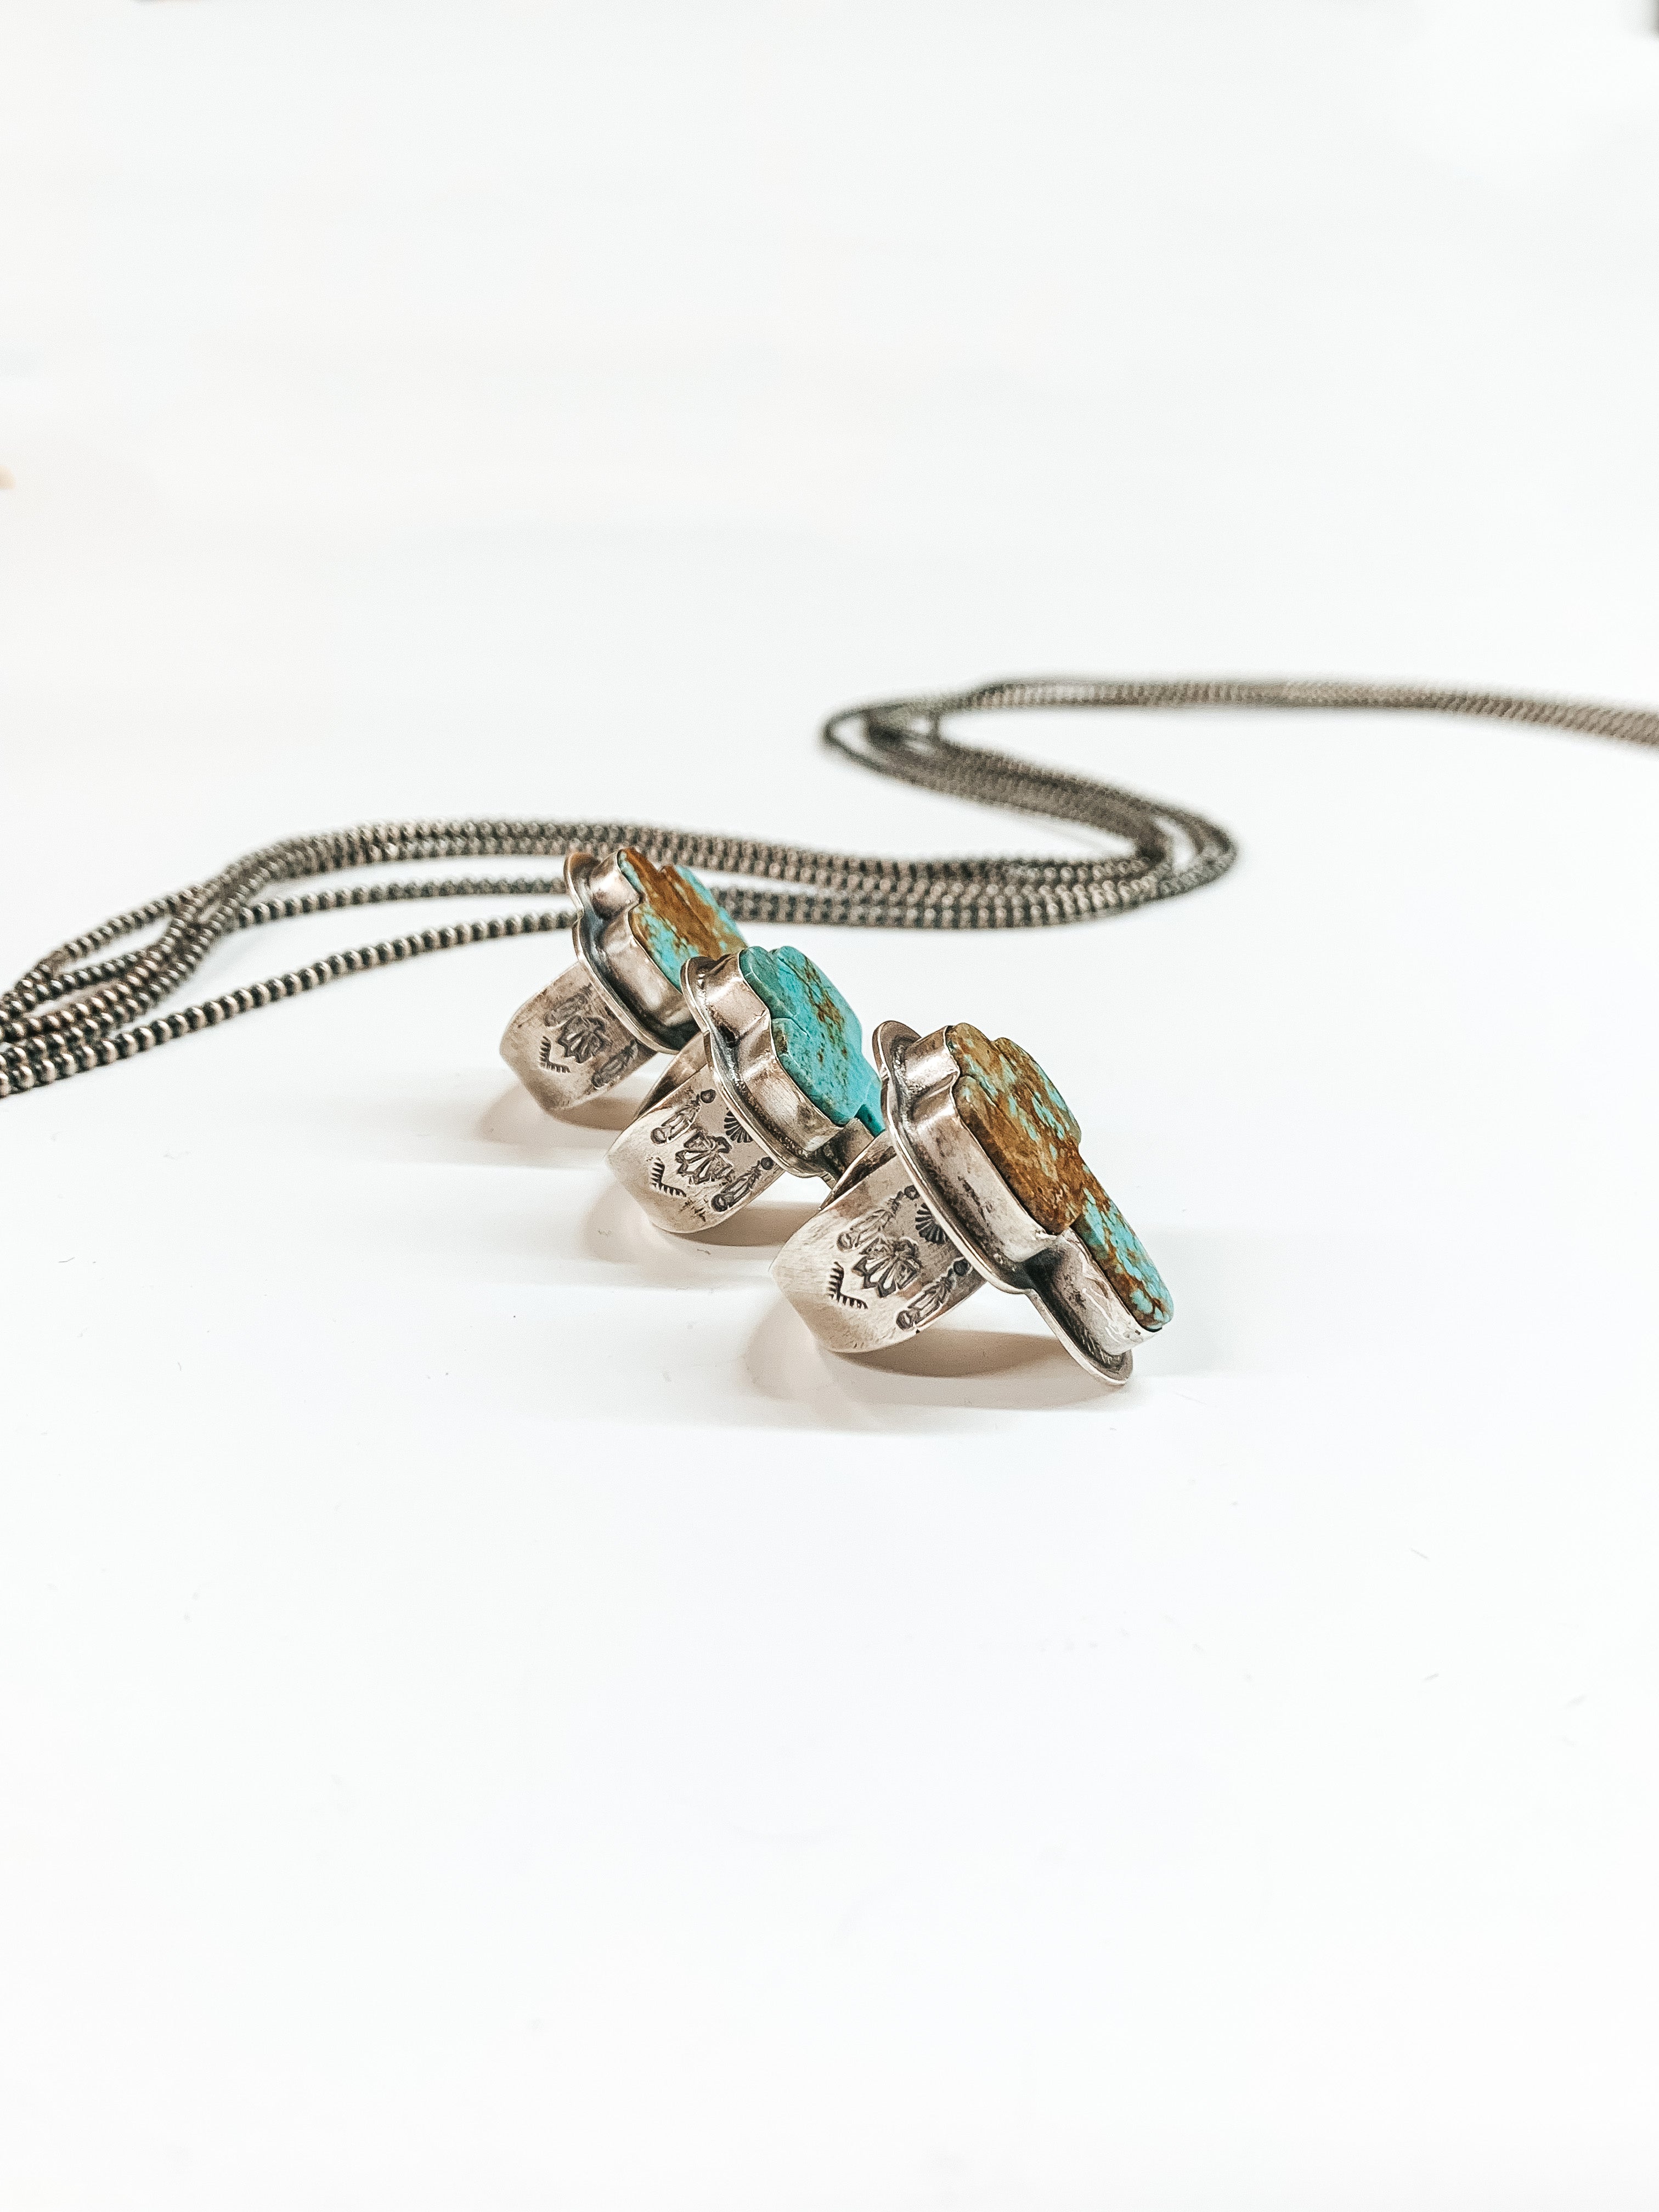 Zia | J Piaso | Navajo Handmade Sterling Silver Ring with Turquoise Cactus Shape Stone - Giddy Up Glamour Boutique